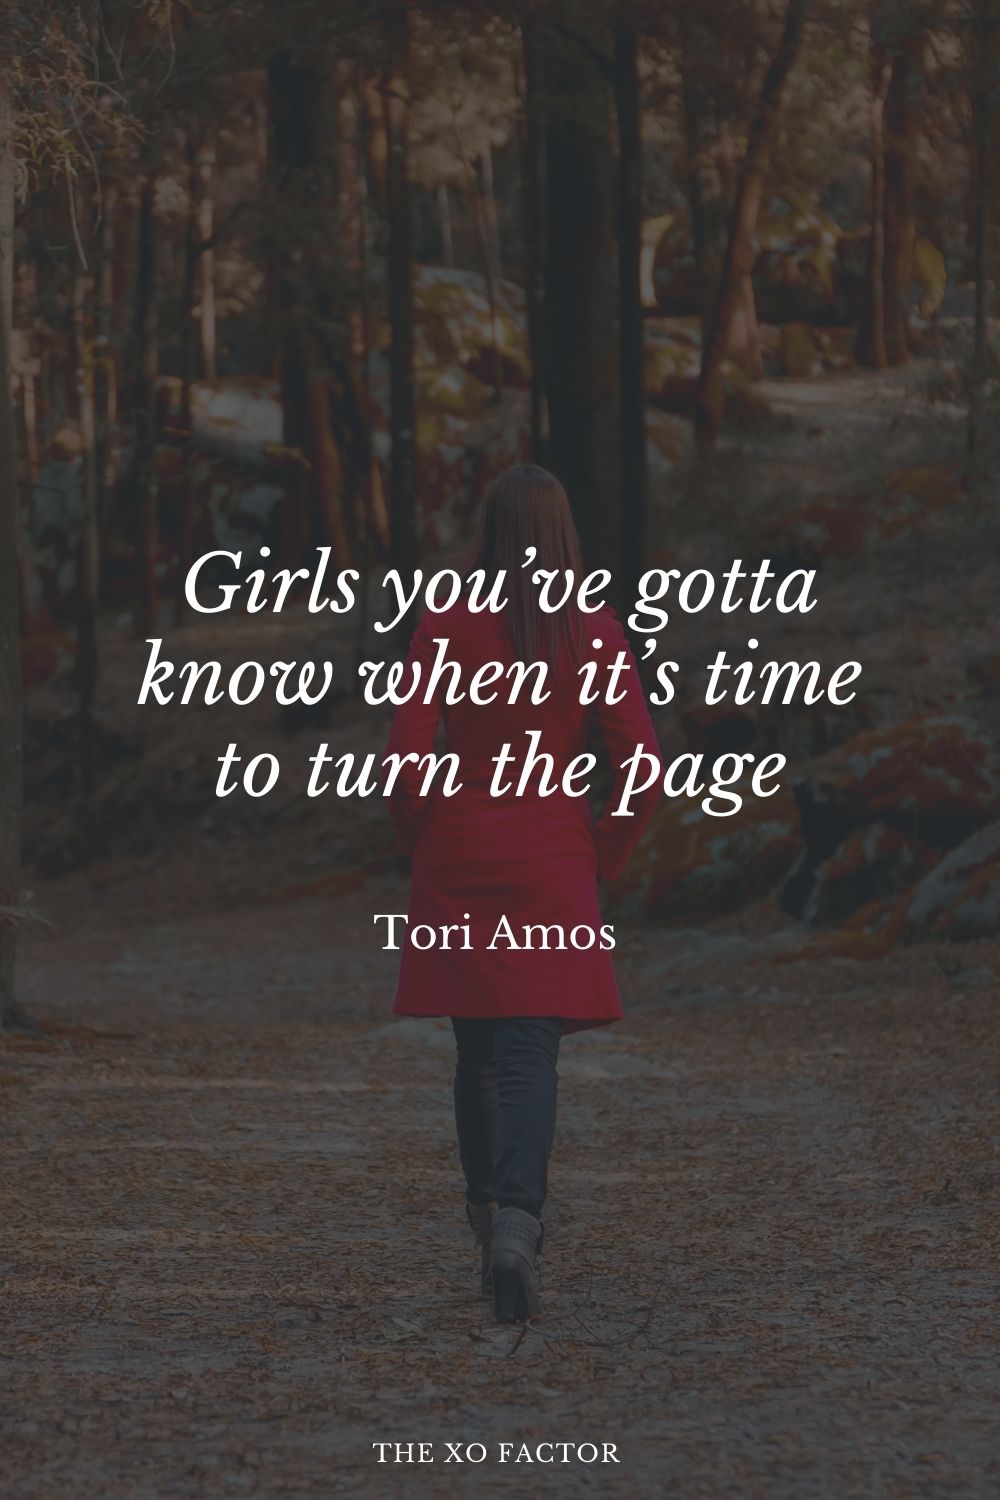 Girls you’ve gotta know when it’s time to turn the page.” Tori Amos